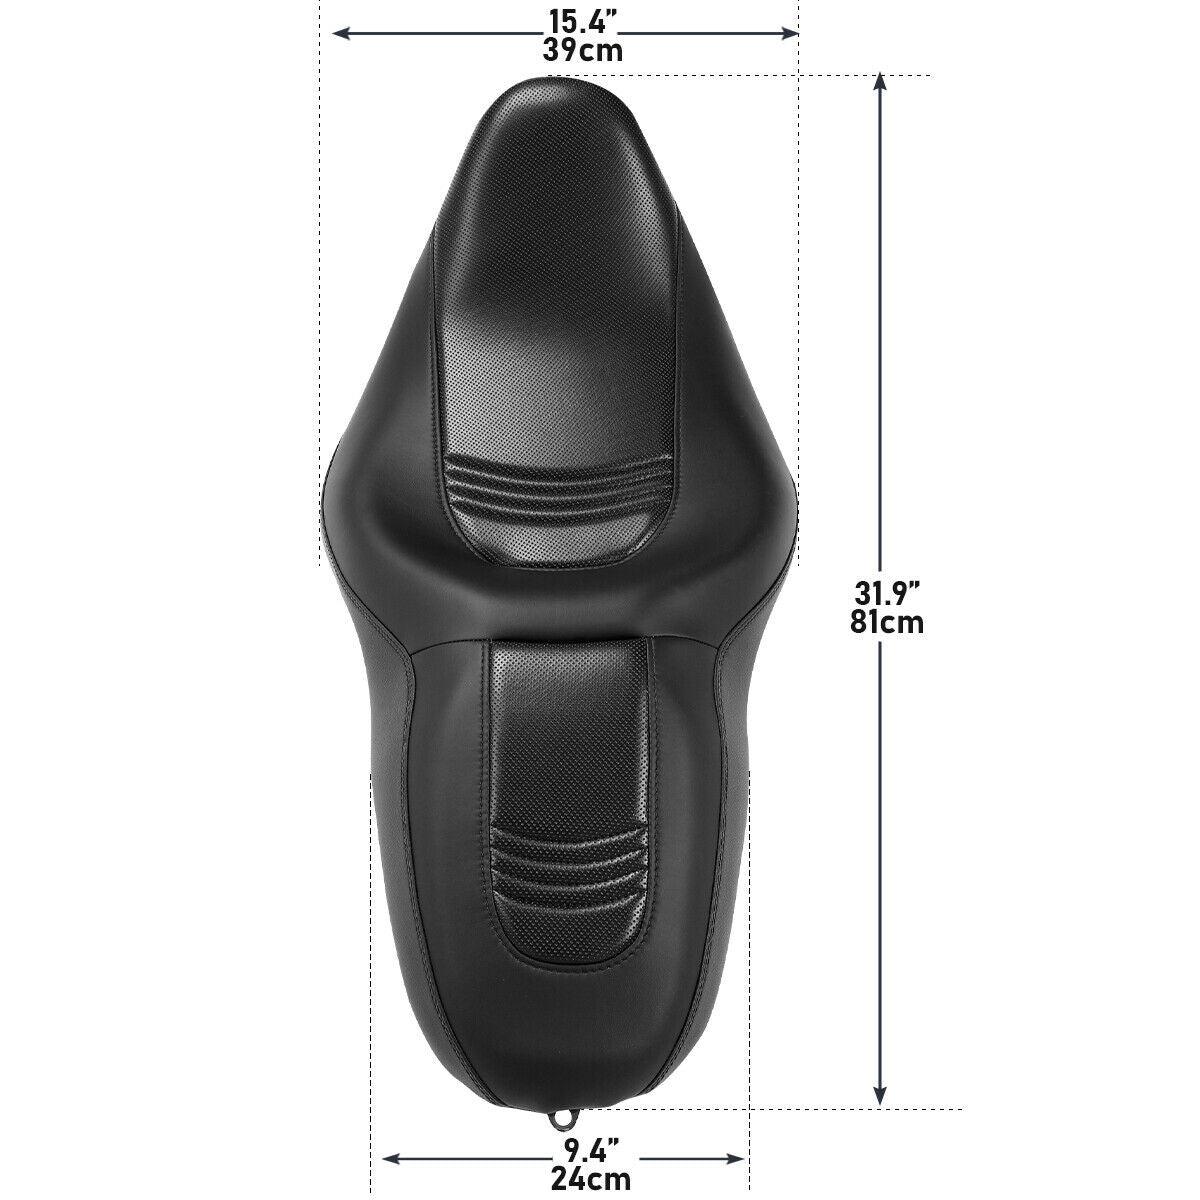 Driver Passenger Seat Fit For Harley Touring Road Glide Street Glide 09-22 18 19 - Moto Life Products